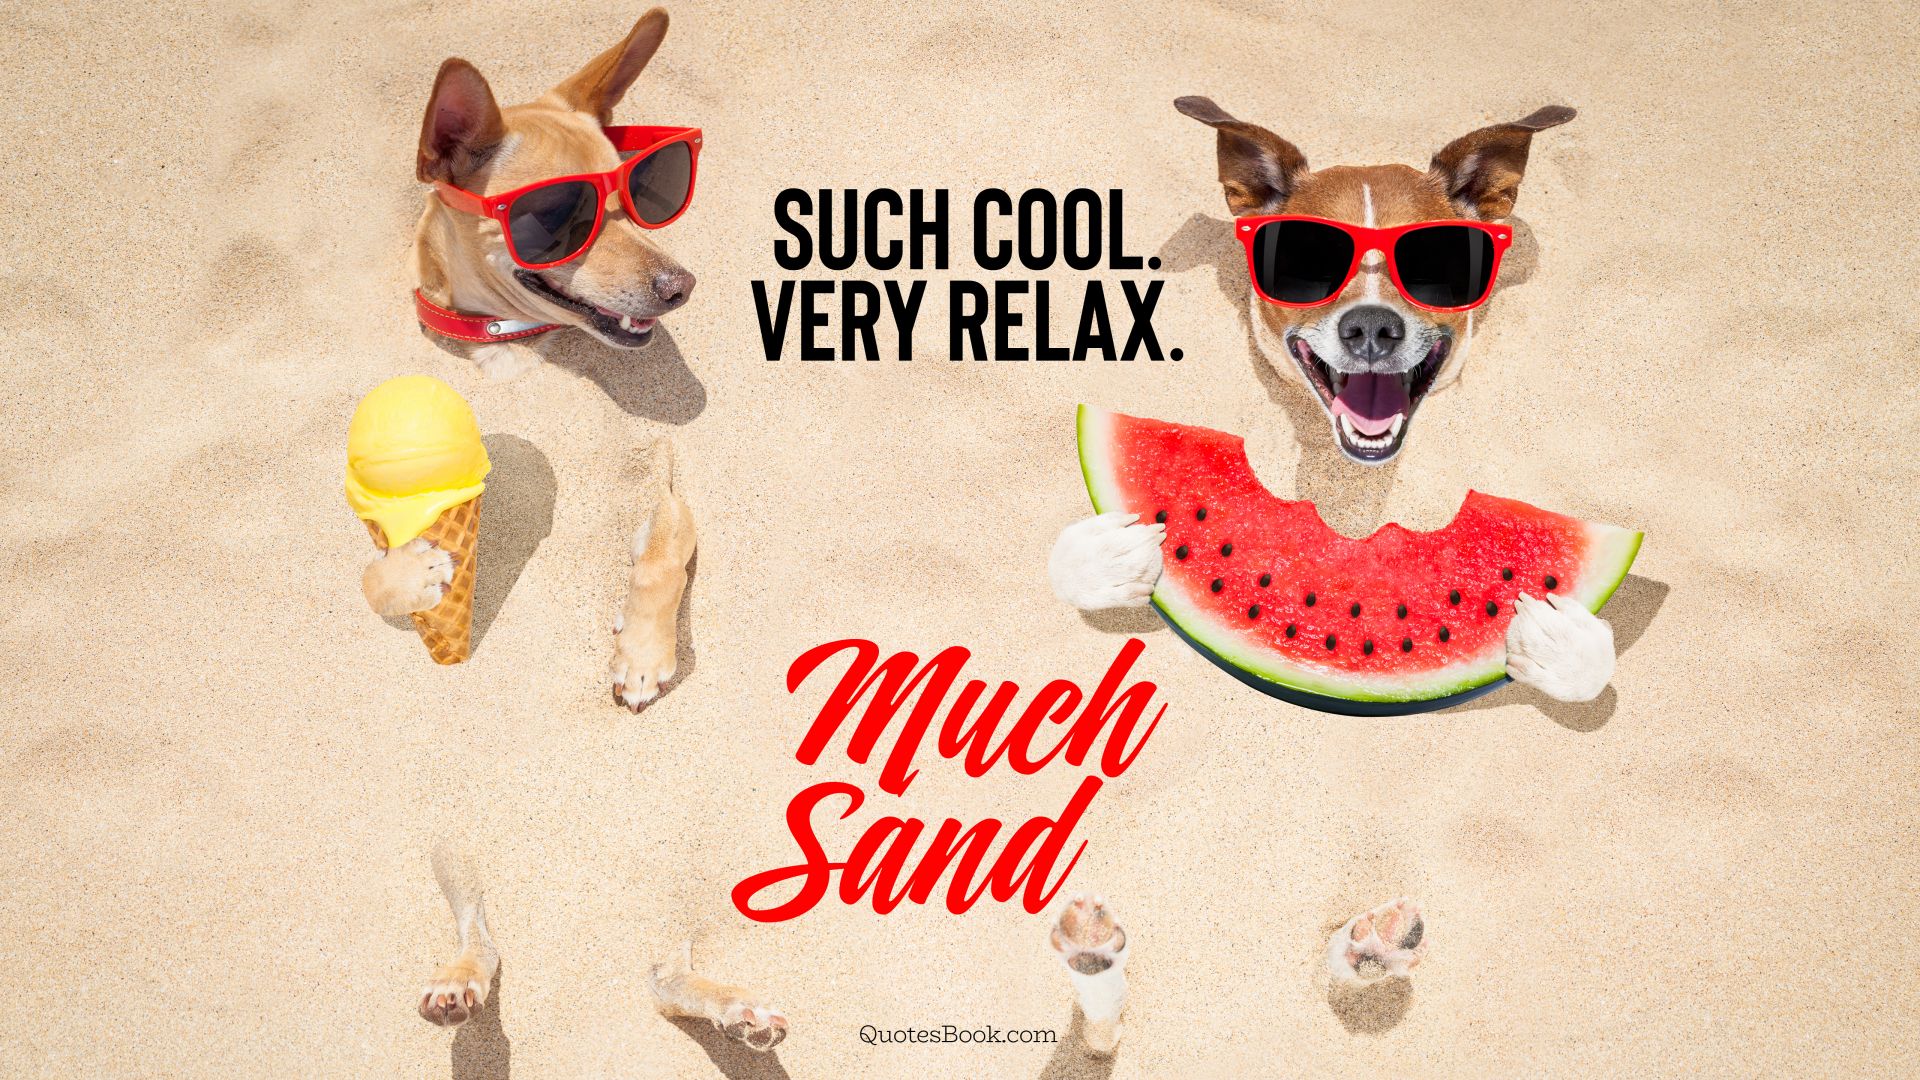 Such cool. Very relax. Much sand